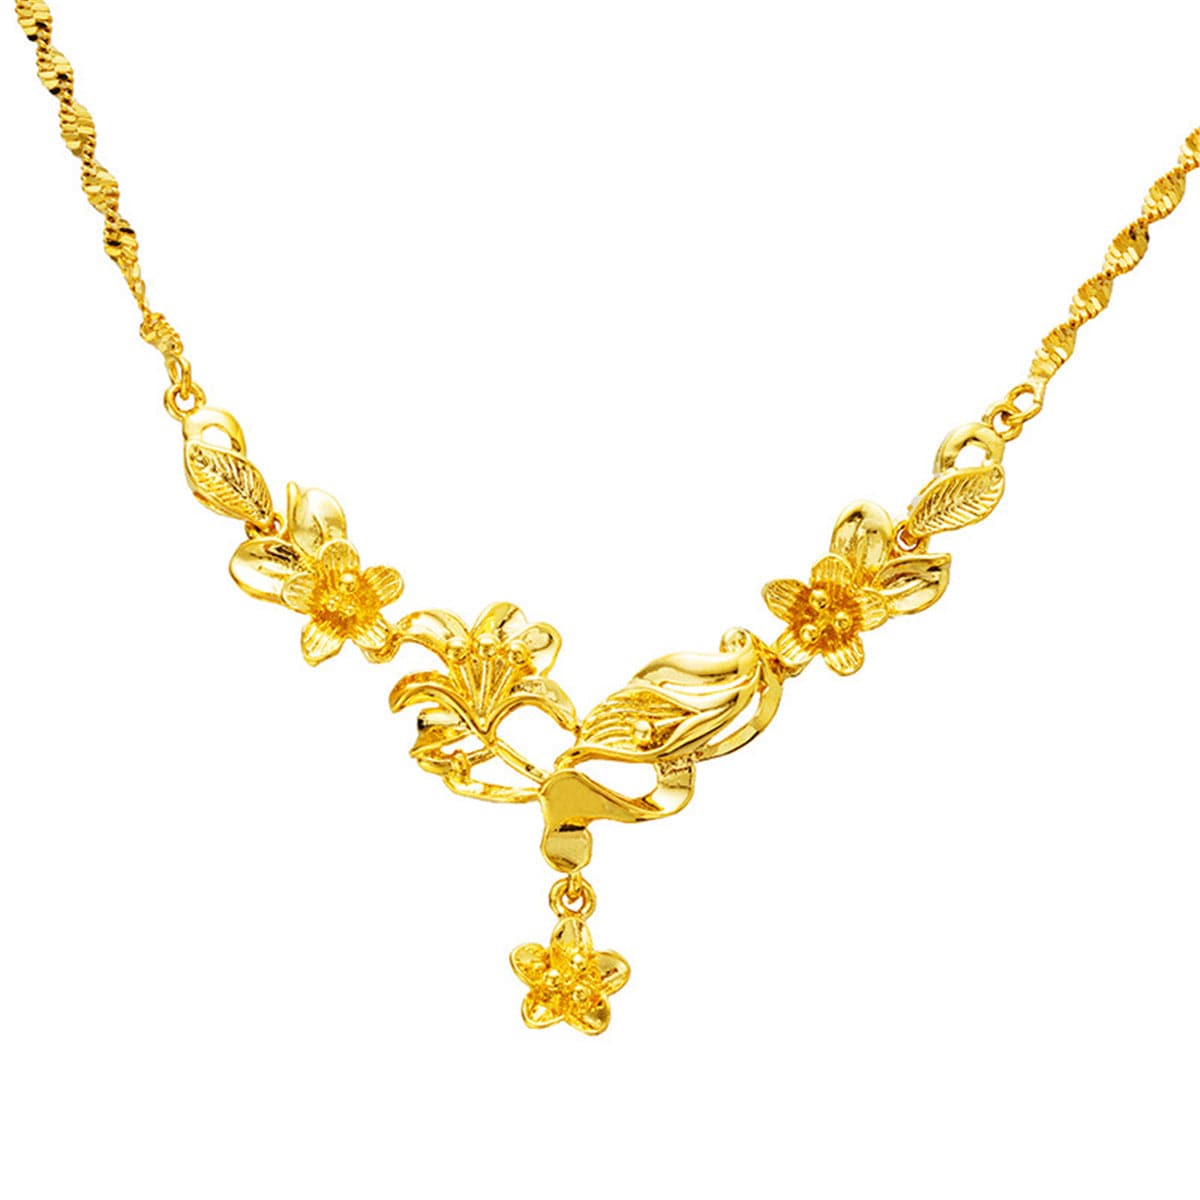 18K Gold-Plated Flower Statement Necklace